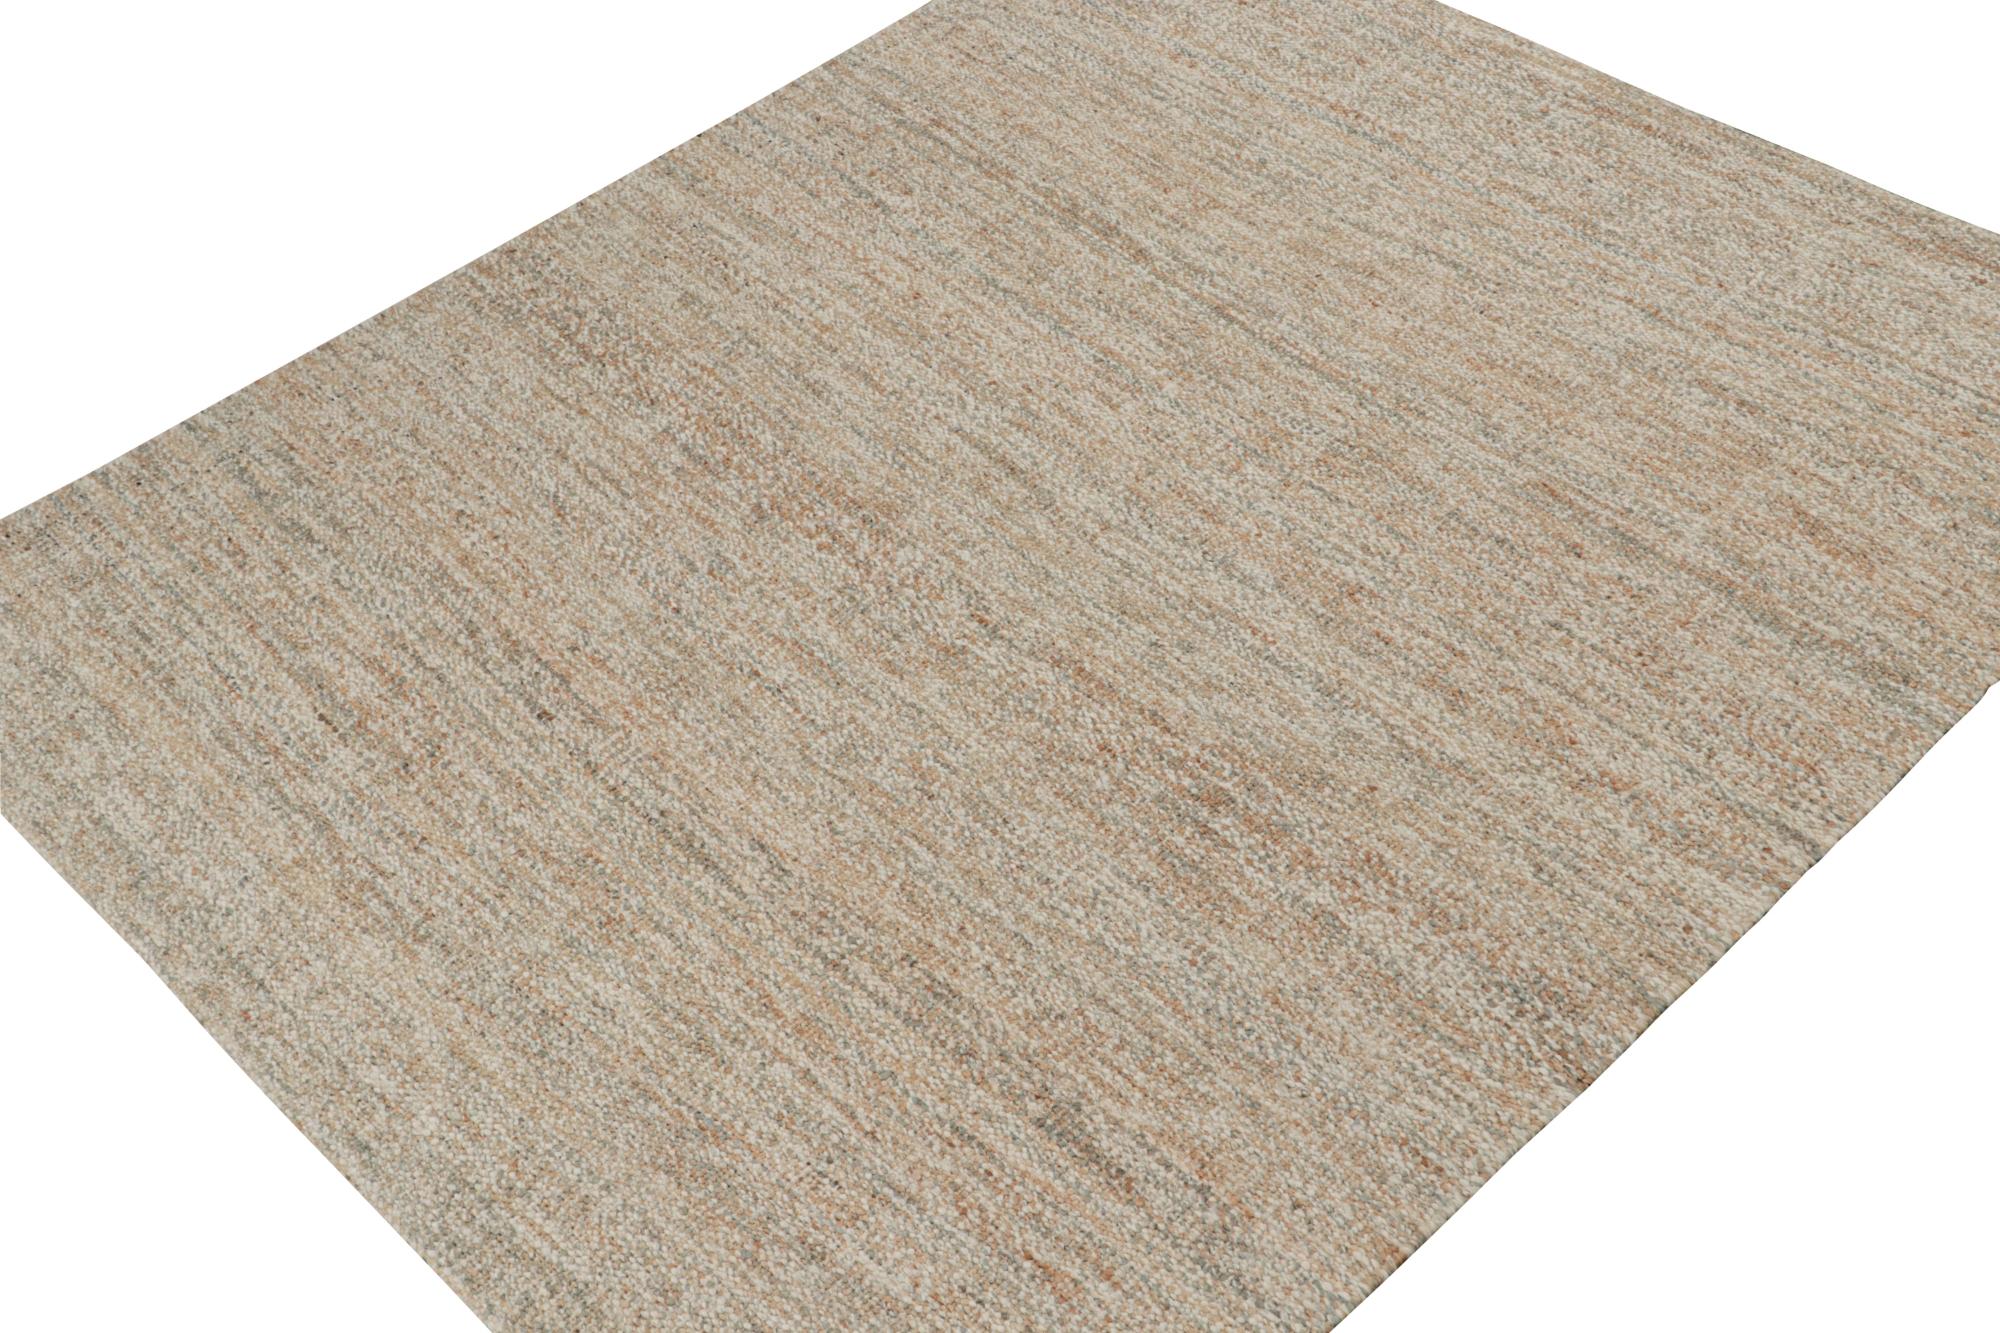 Indian Rug & Kilim’s Contemporary Jute Kilim in Beige-Brown For Sale